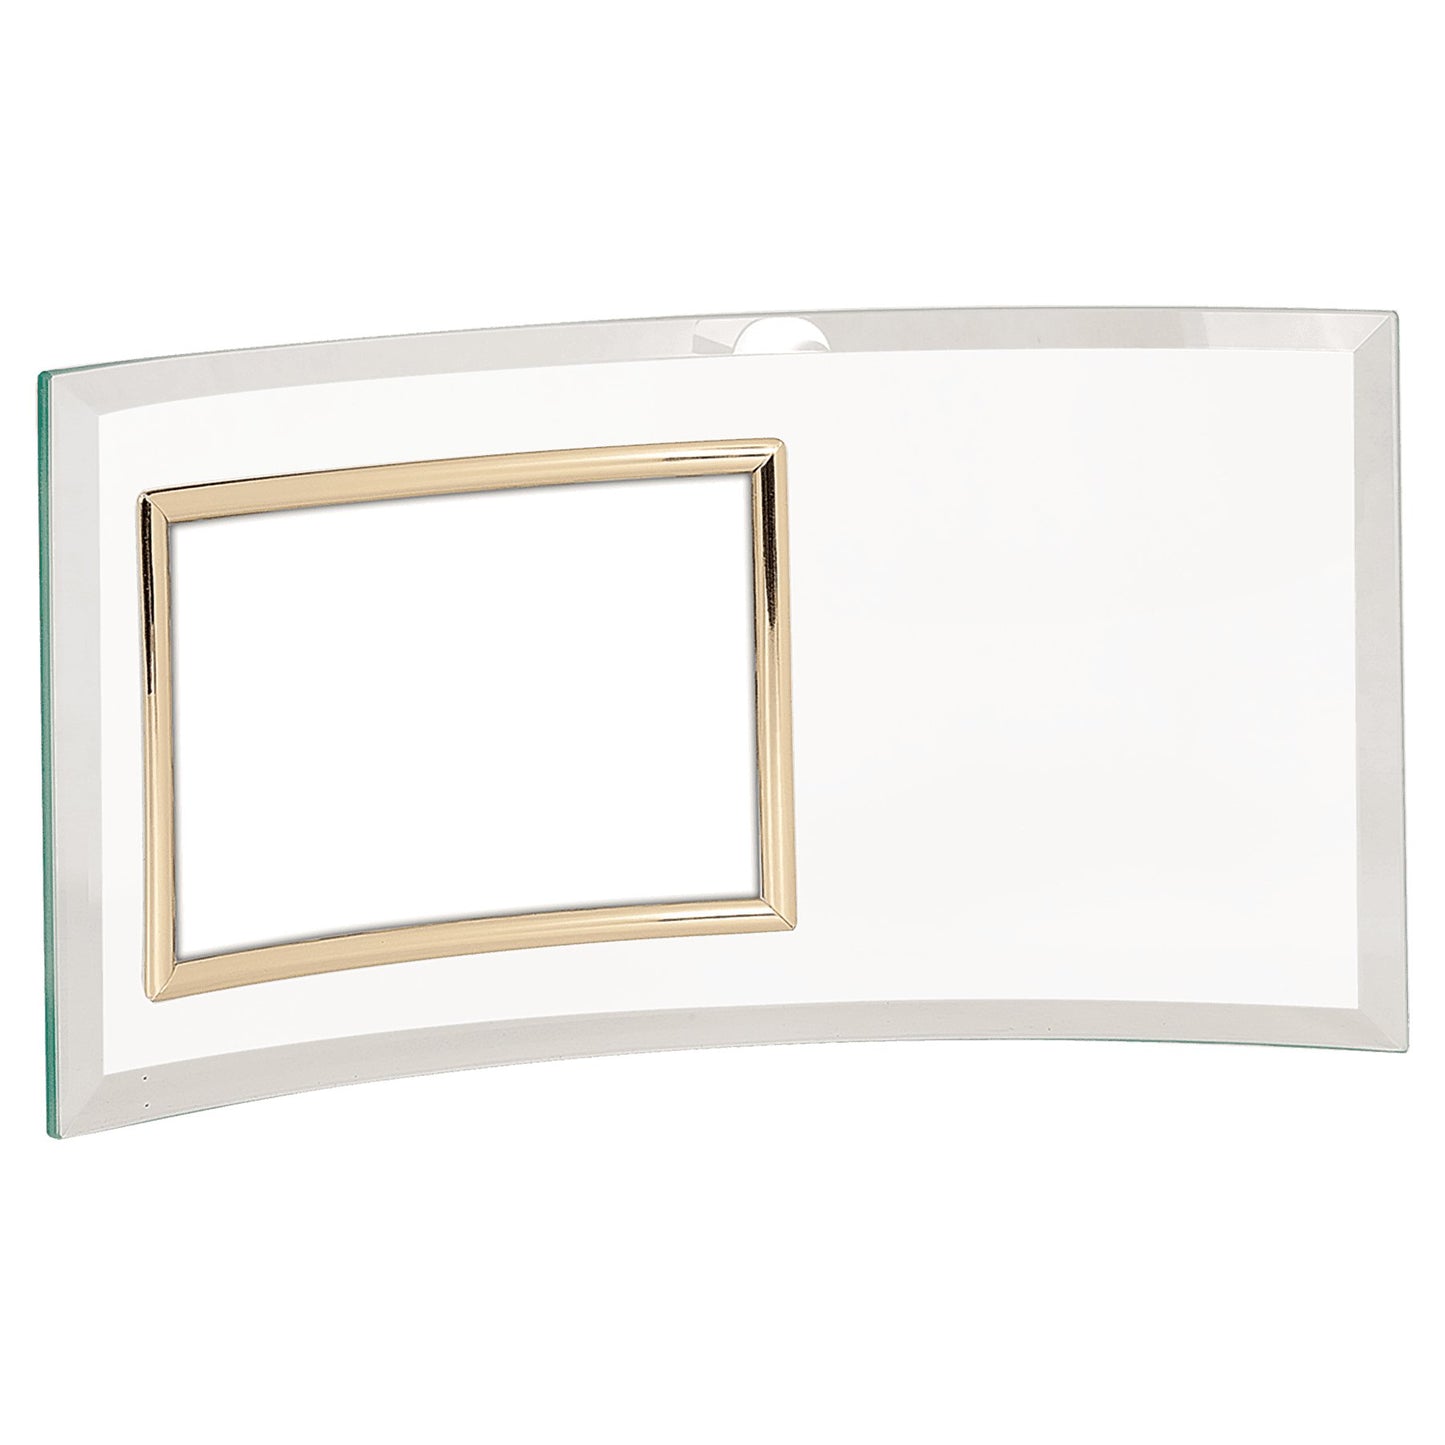 Elegantly Personalized Jade Glass Crescent with Picture Frame - Legacy Creator Inc12 3/4" x 6 1/2" Jade Glass Crescent with 6" x 4" Picture Frame